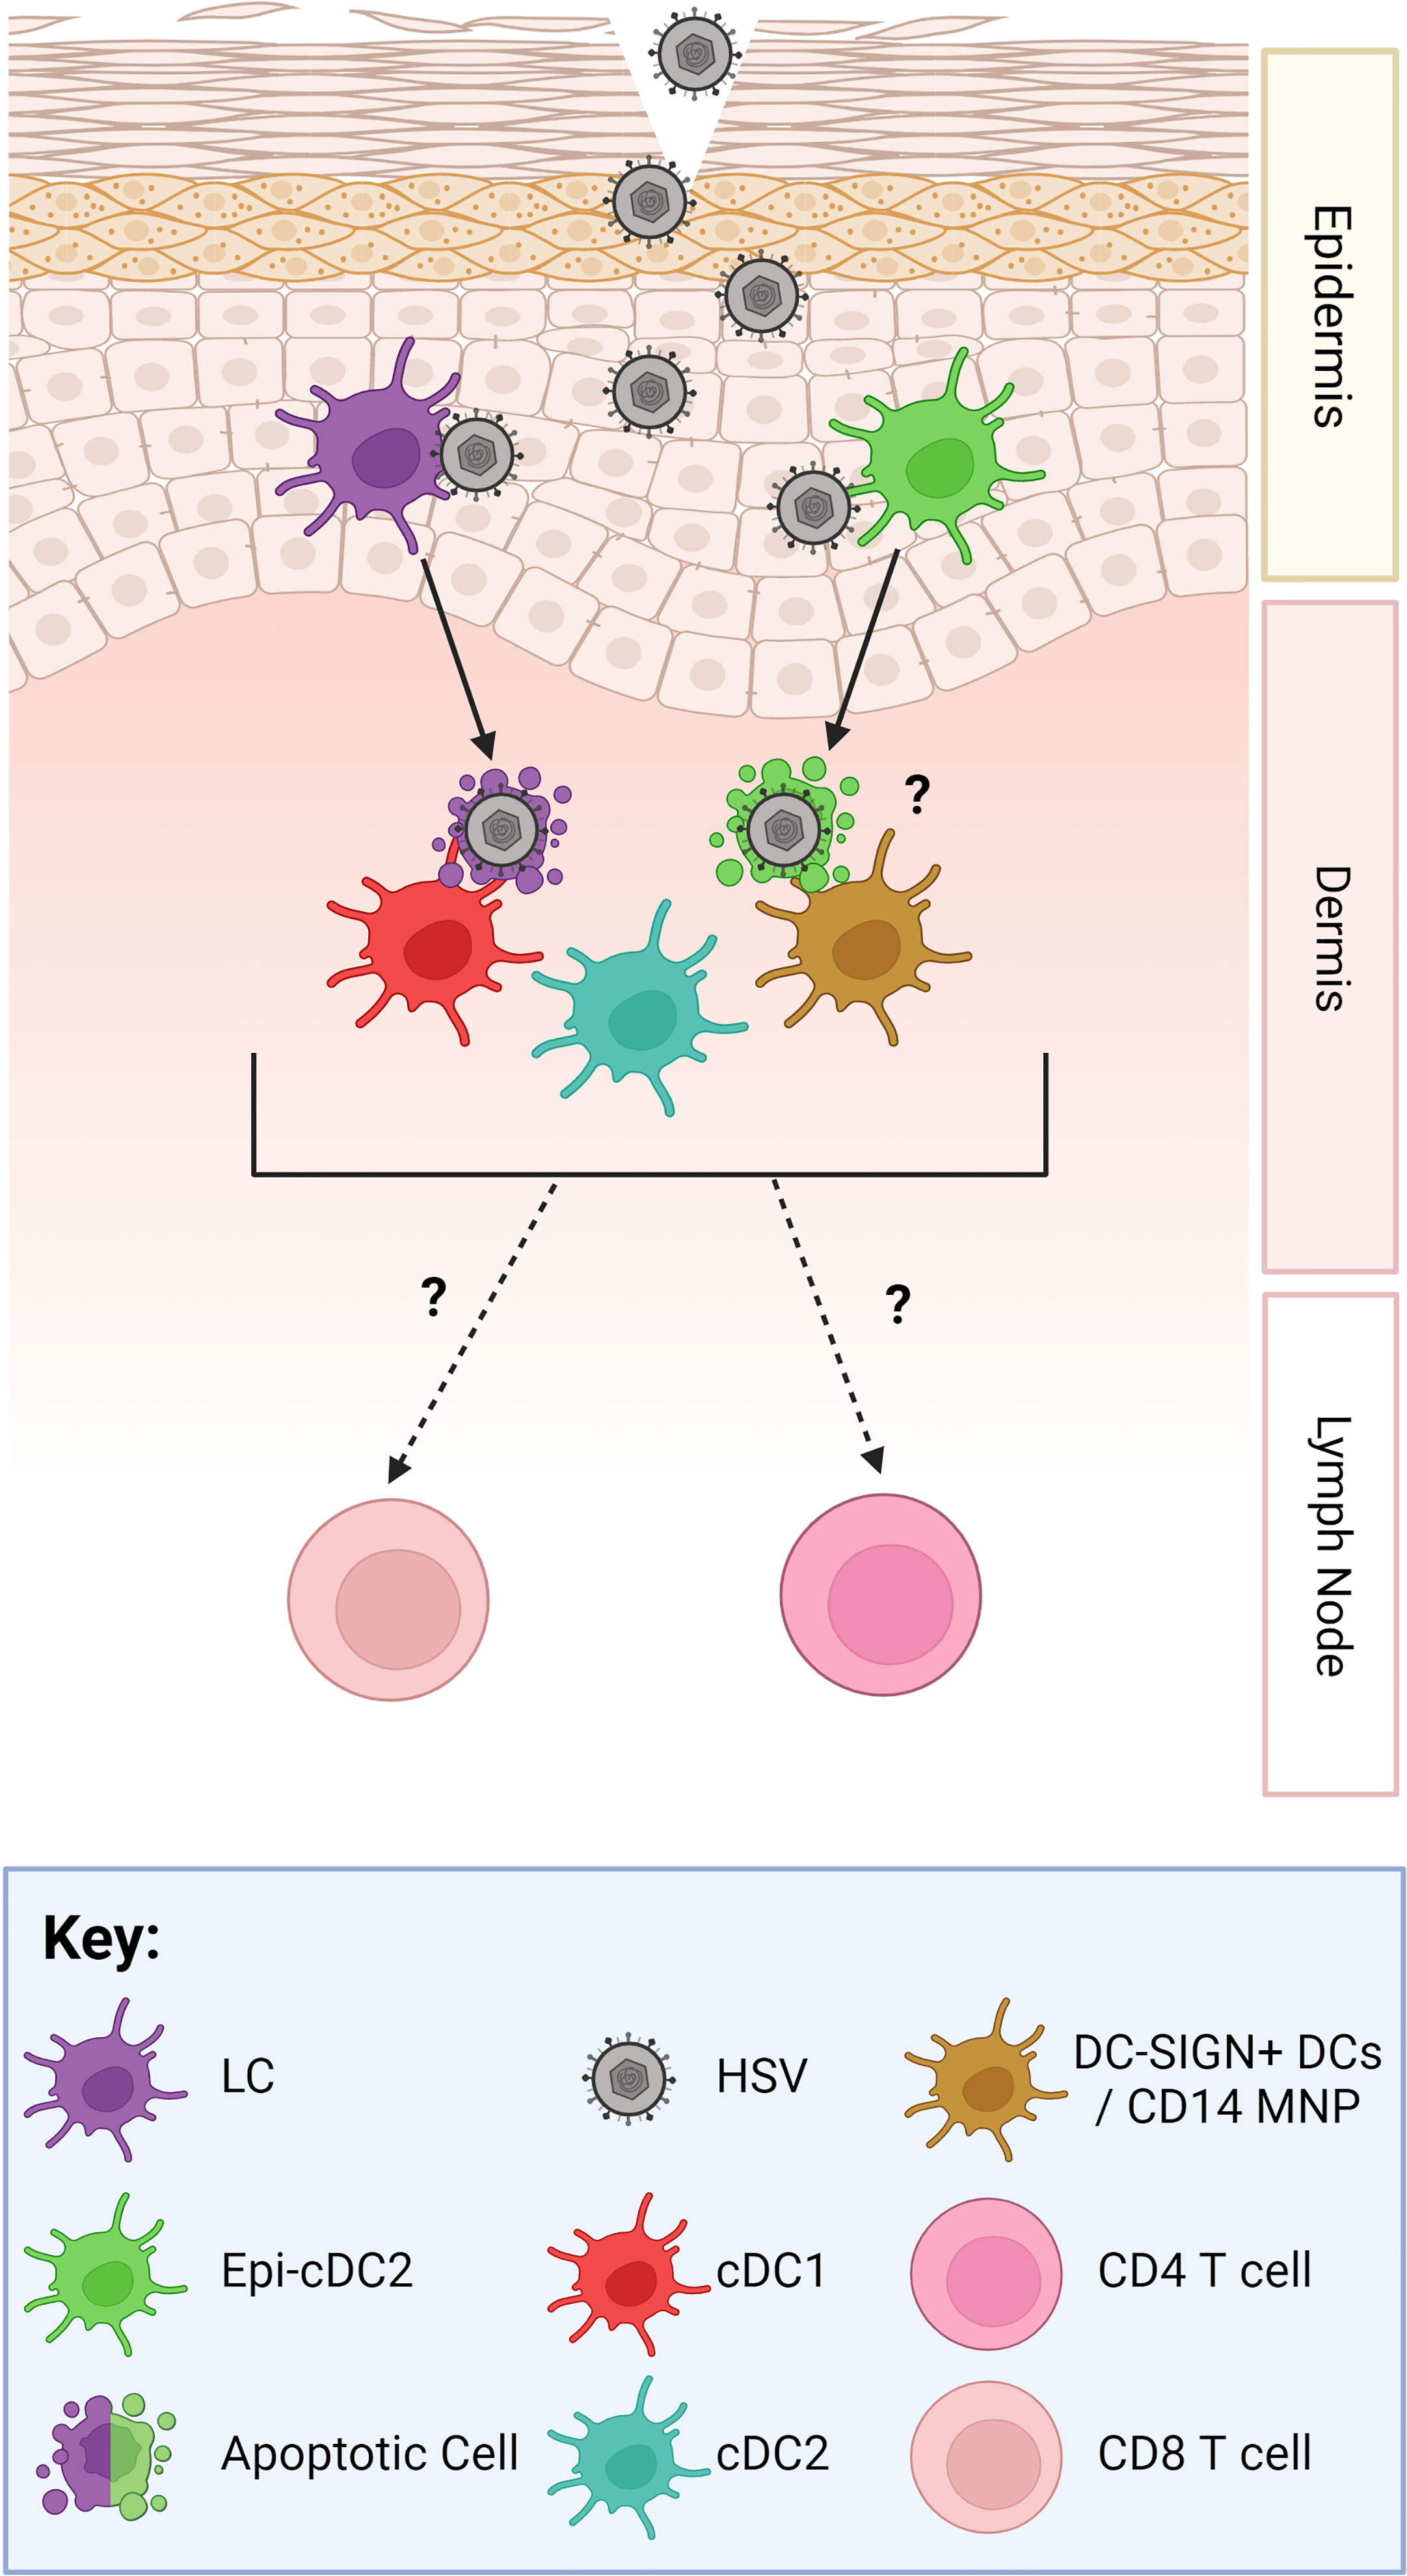 Frontiers | Cytokines and chemokines: The vital role they play in